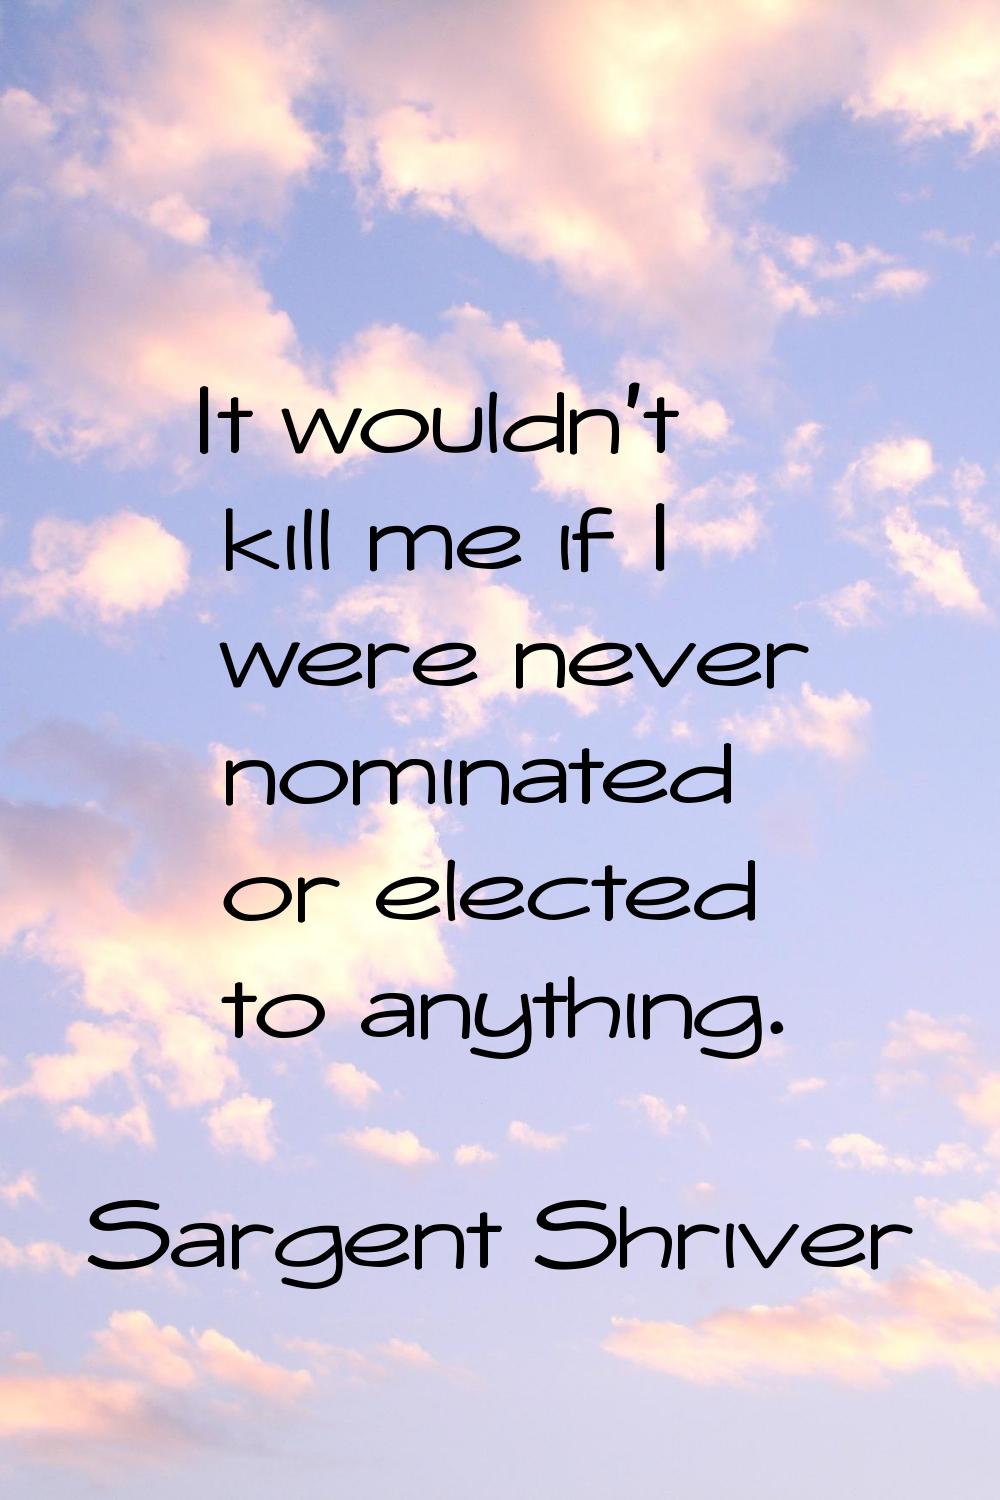 It wouldn't kill me if I were never nominated or elected to anything.